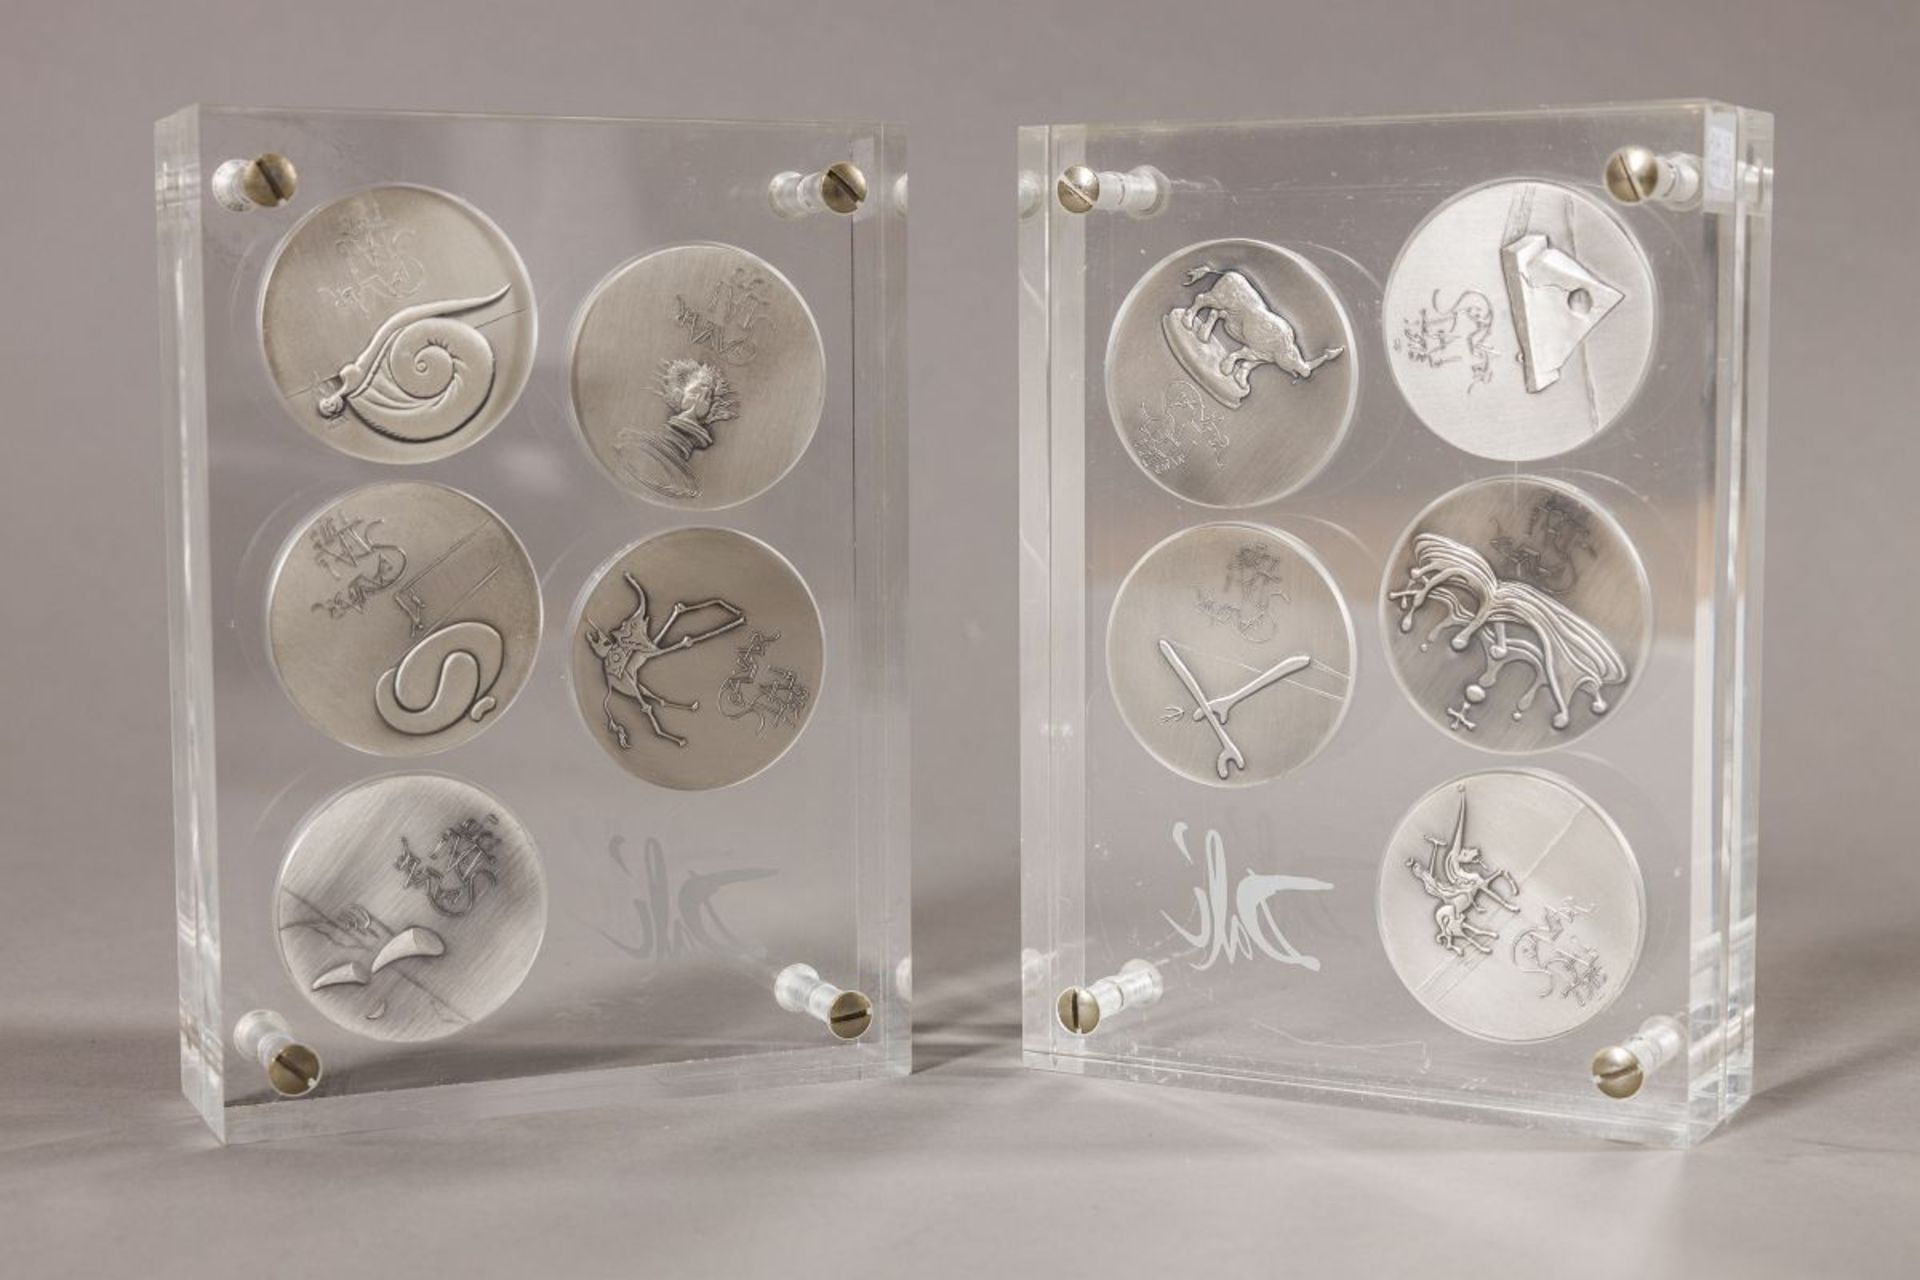 Dalí, Salvador(1904 - 1989)Ten Commandments, 1975each 5 silvermedals in acrylic glasseach - Image 9 of 14